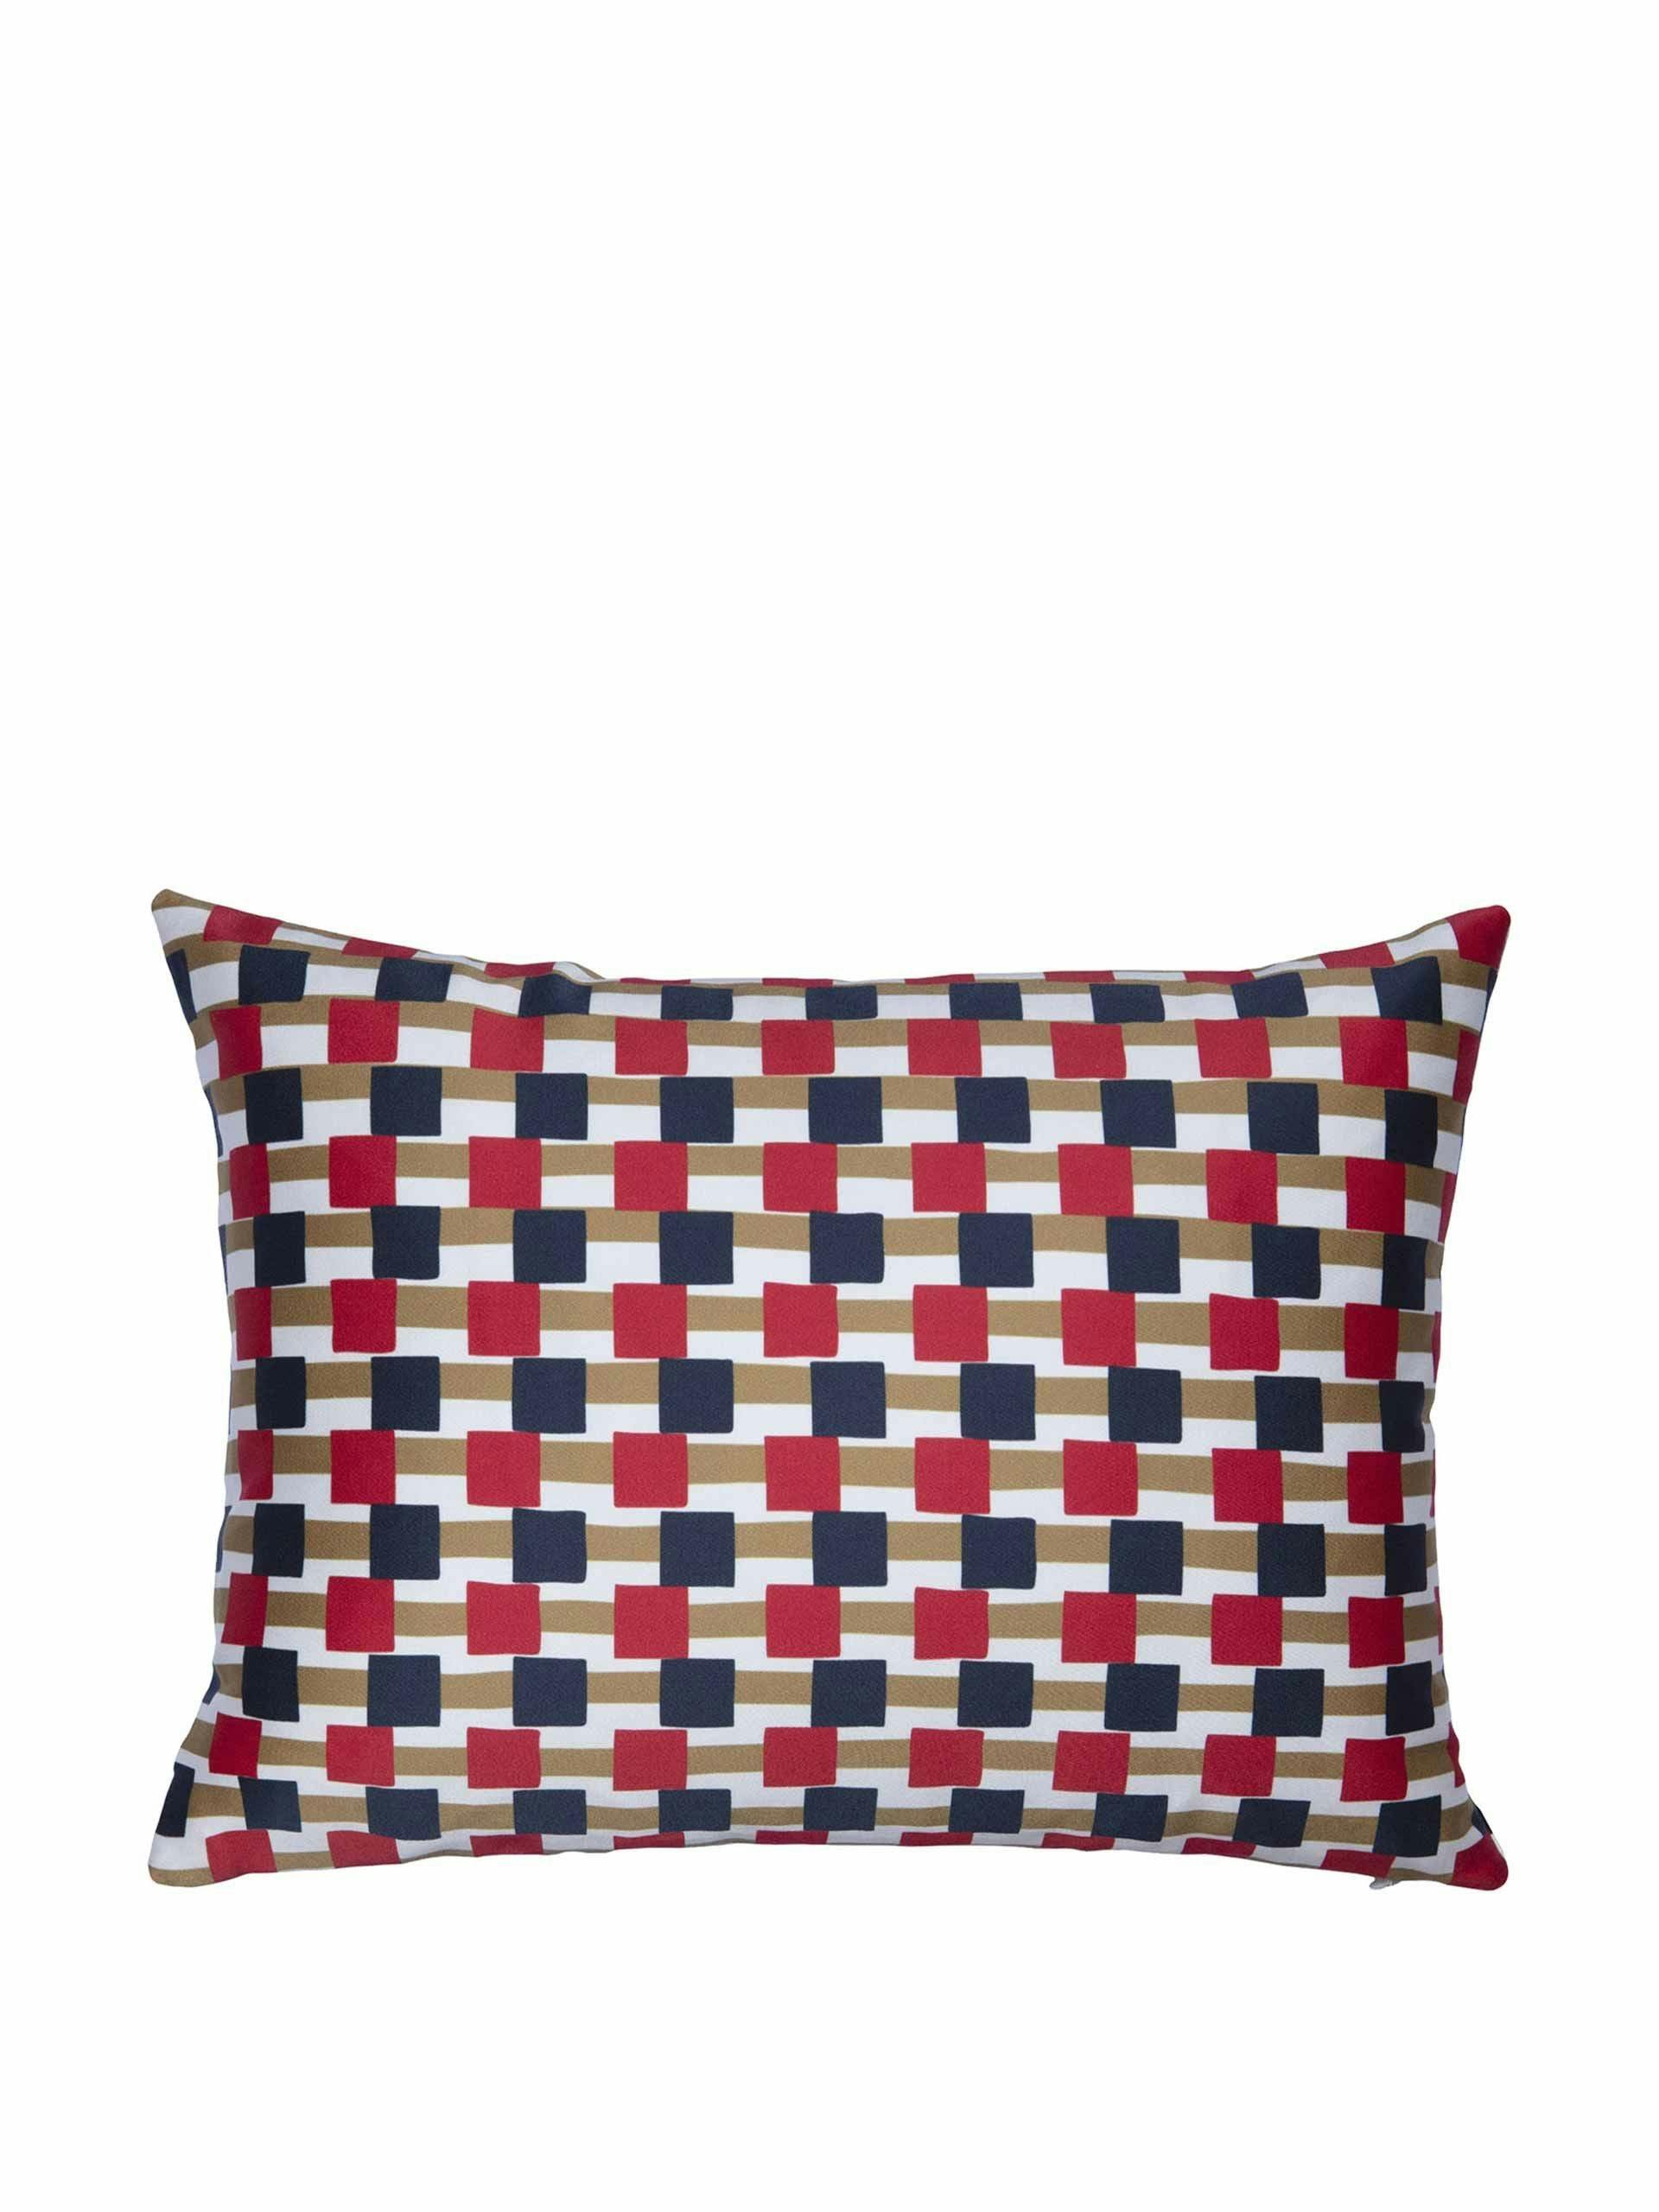 Set of two geometric patterned cushions